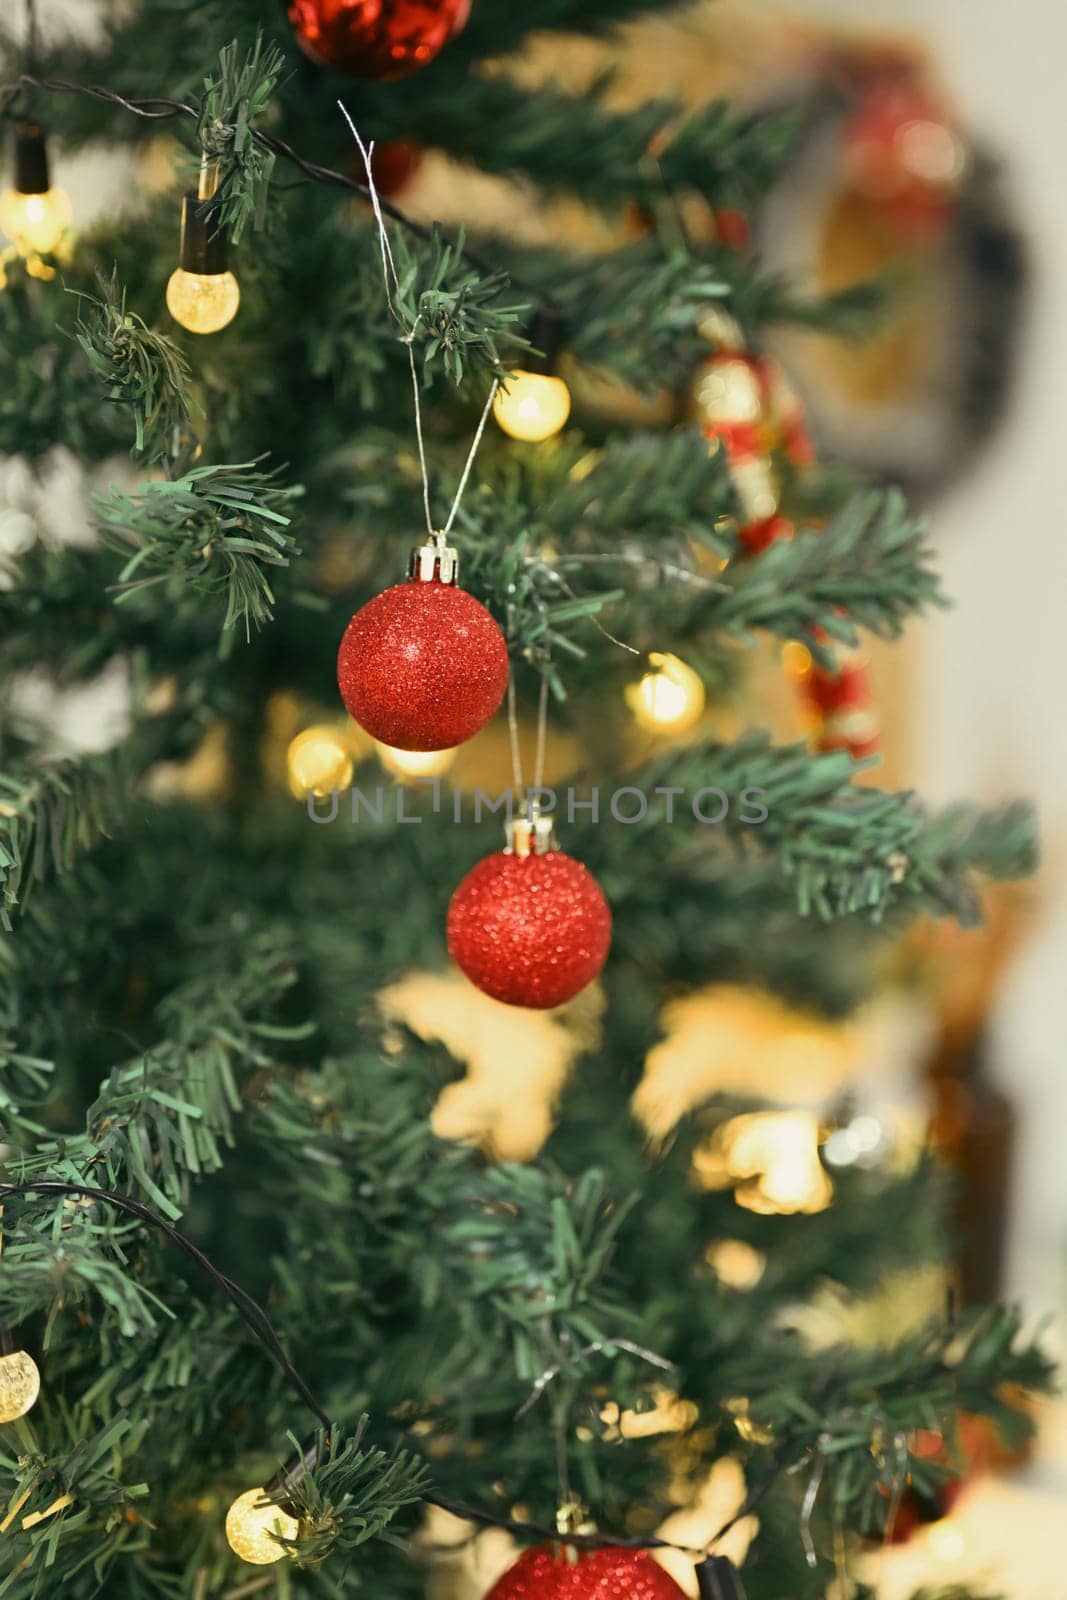 Glitter ornaments and lights on Christmas tree branch decorated. Christmas holiday and New Year concept.